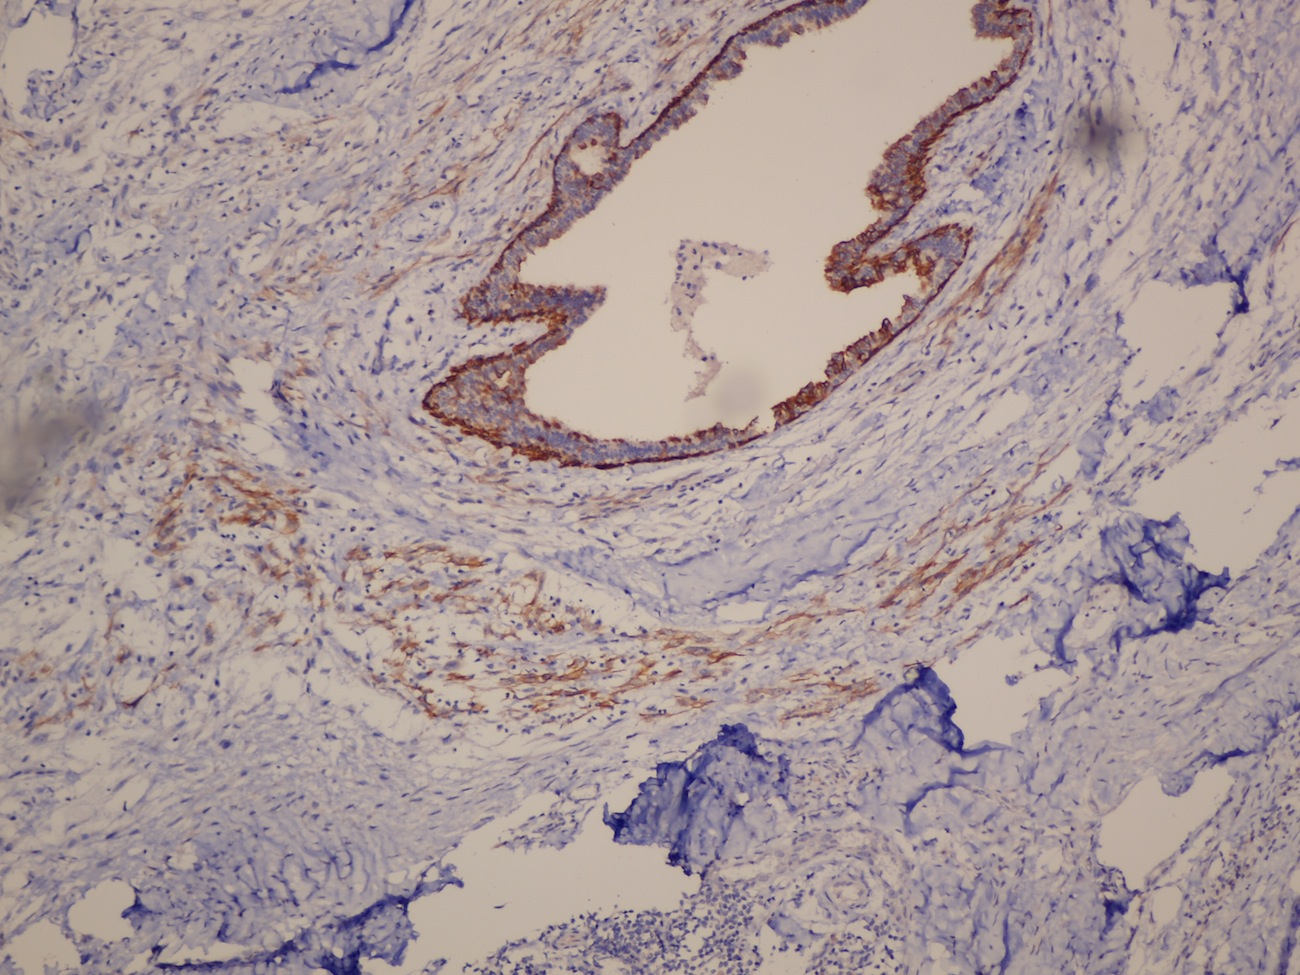 Tumor cells positive for CK 5/6 IHC